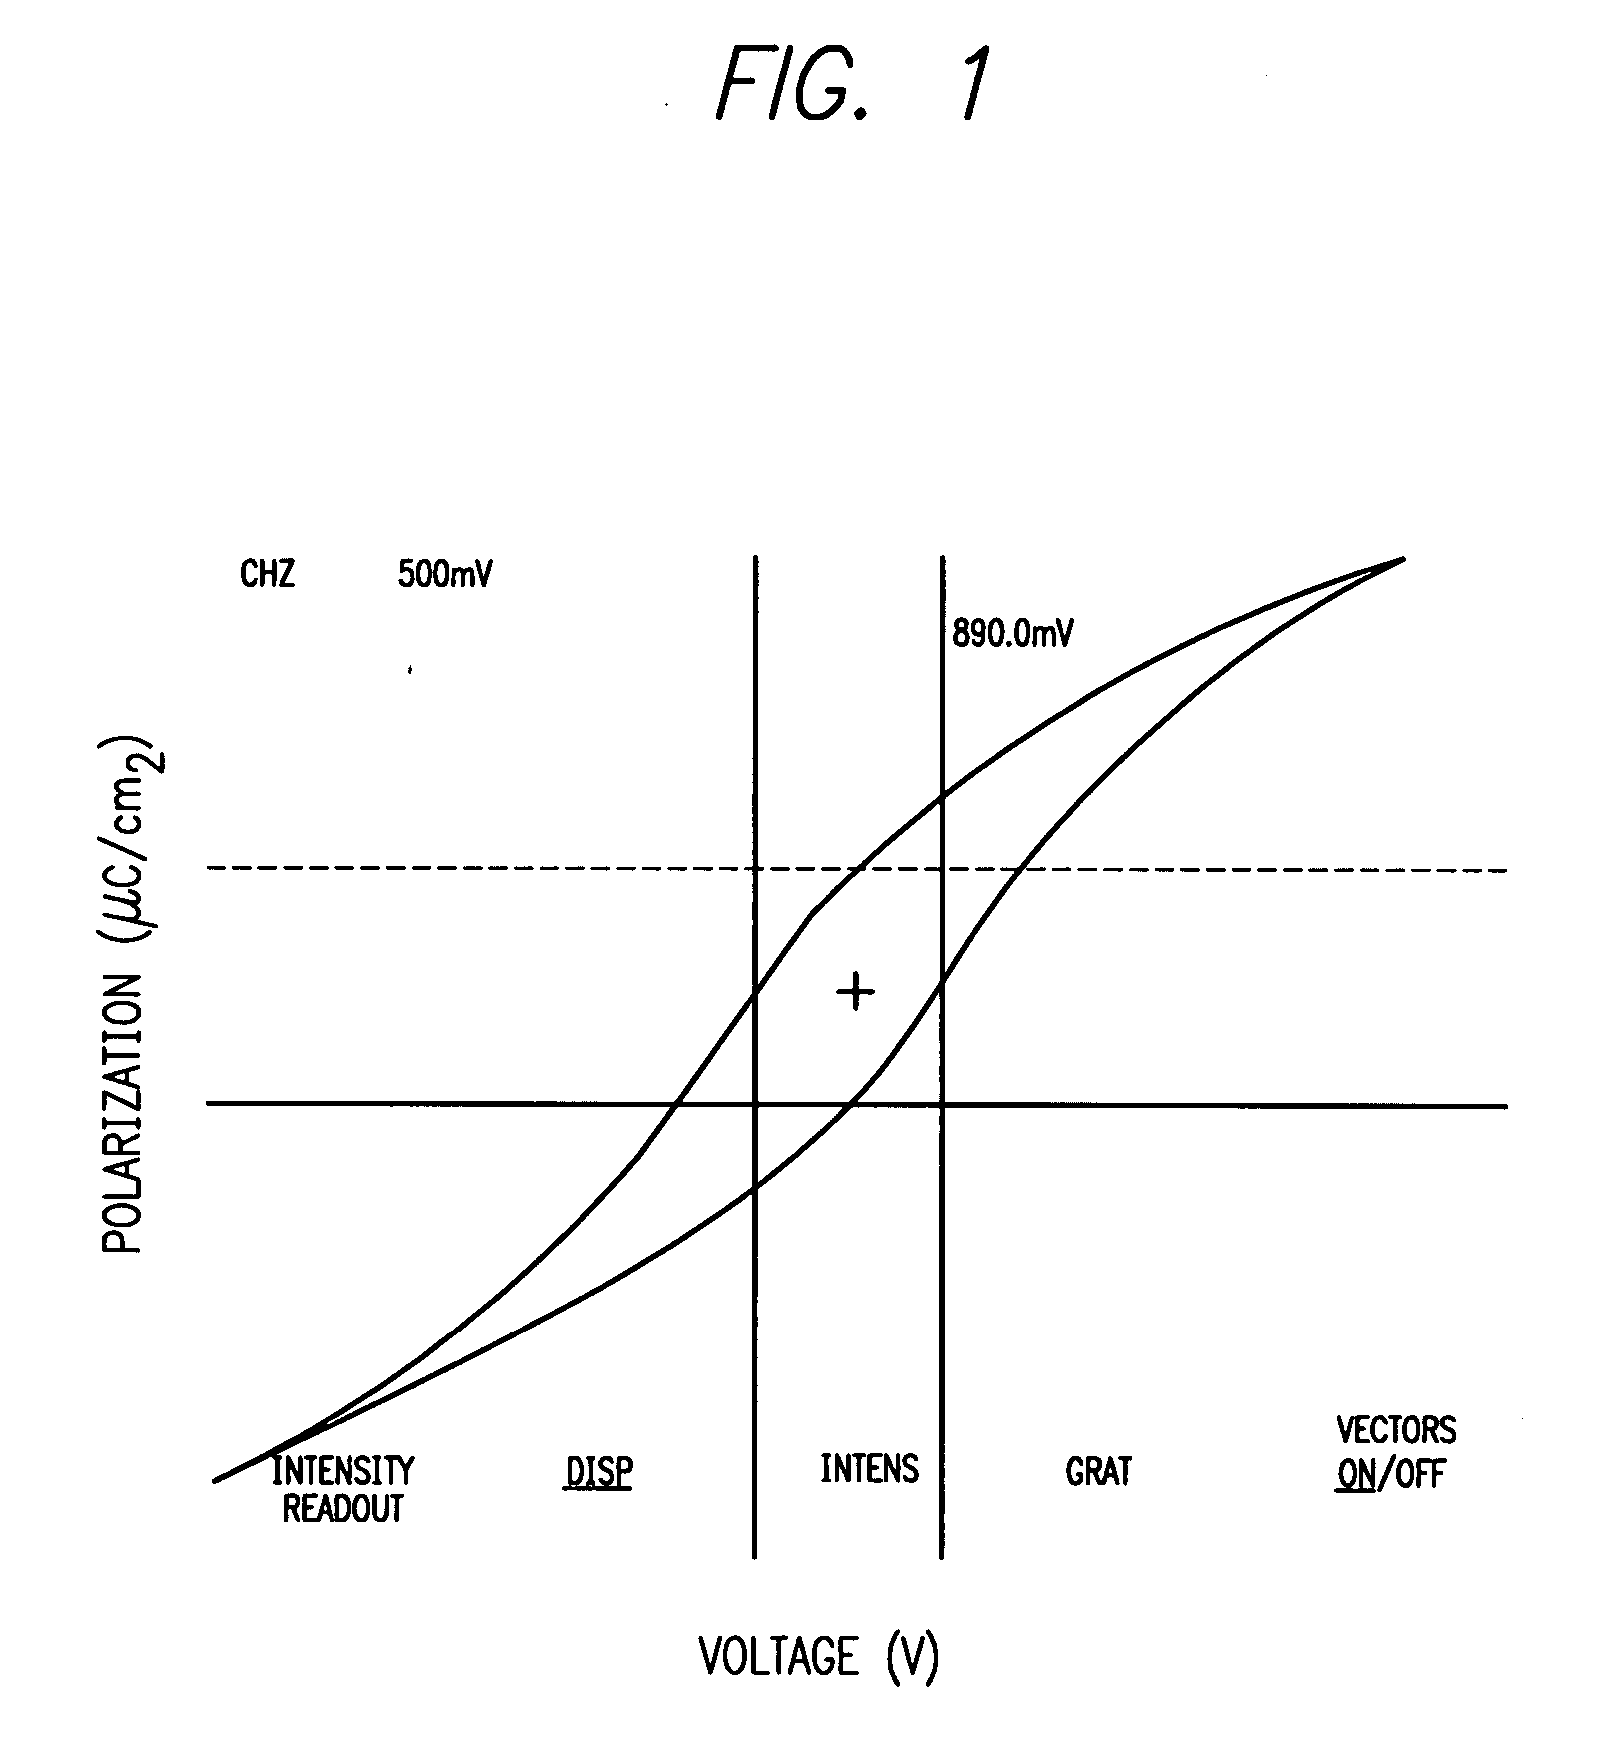 Water-soluble group III polyether acid salt complexes and thin films from same